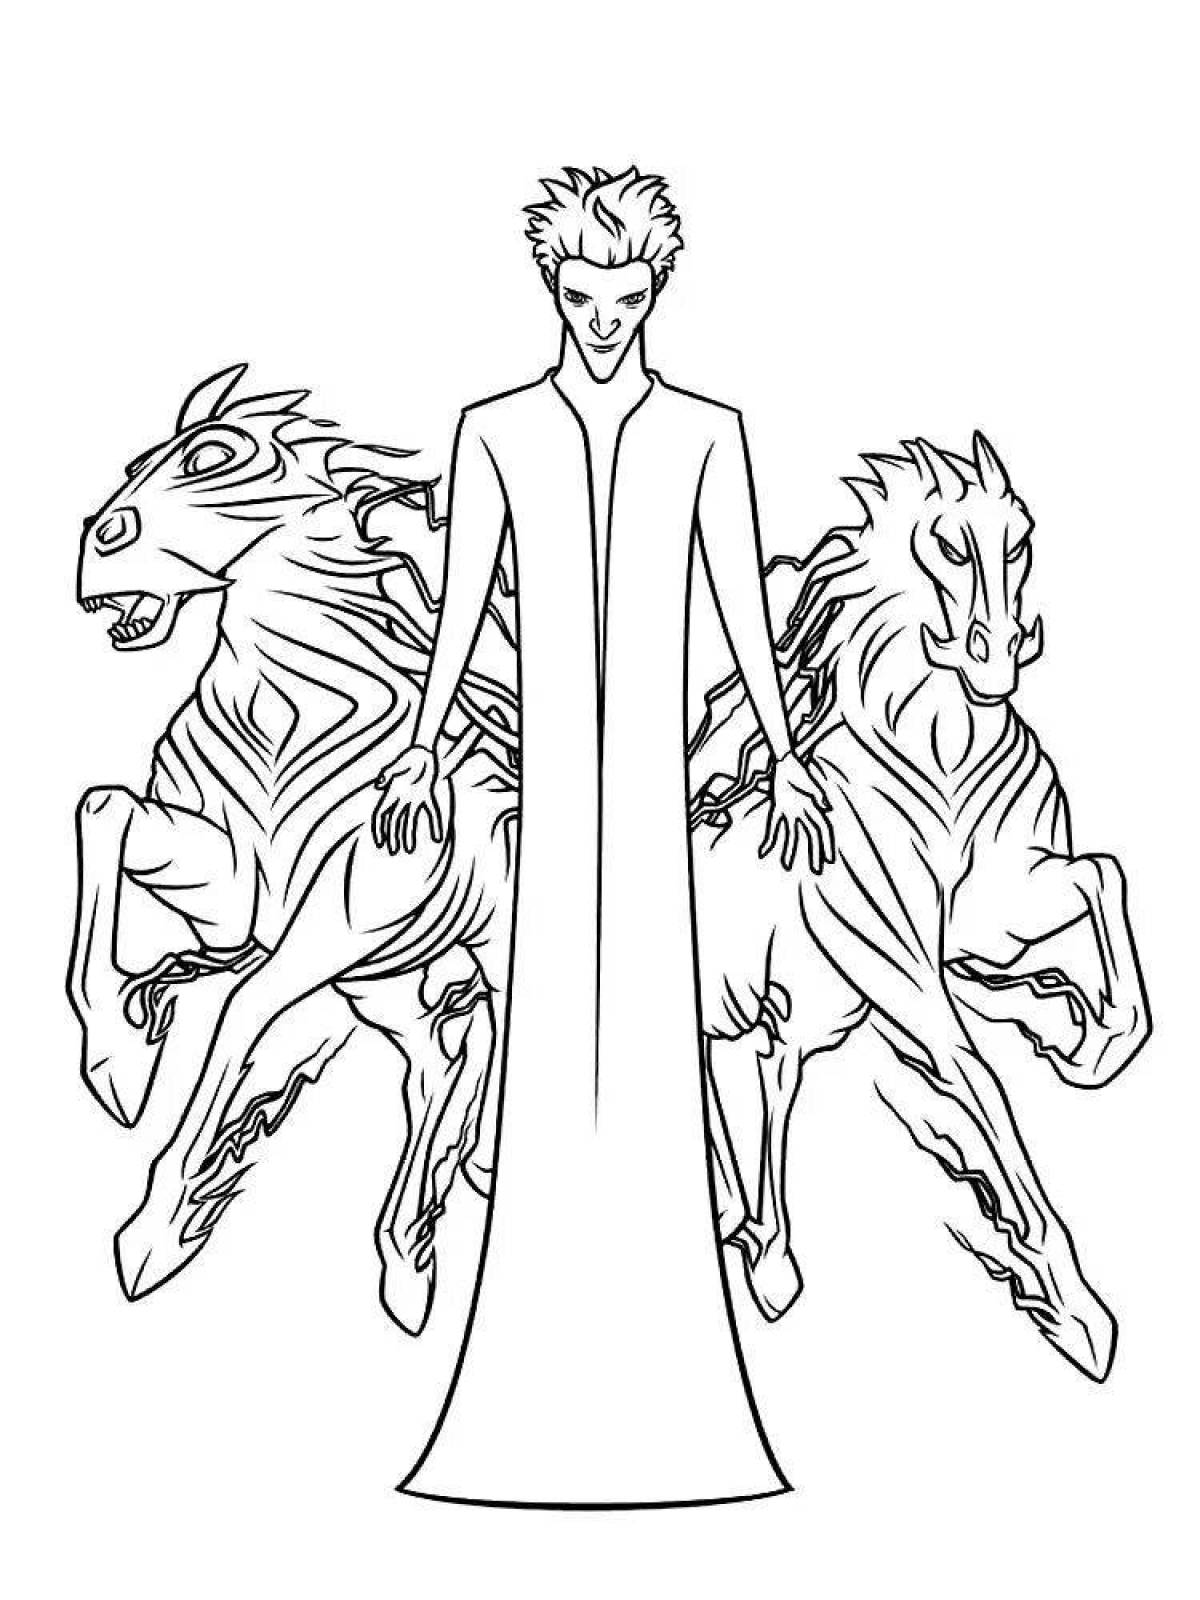 Glorious Rise of the Guardians coloring page